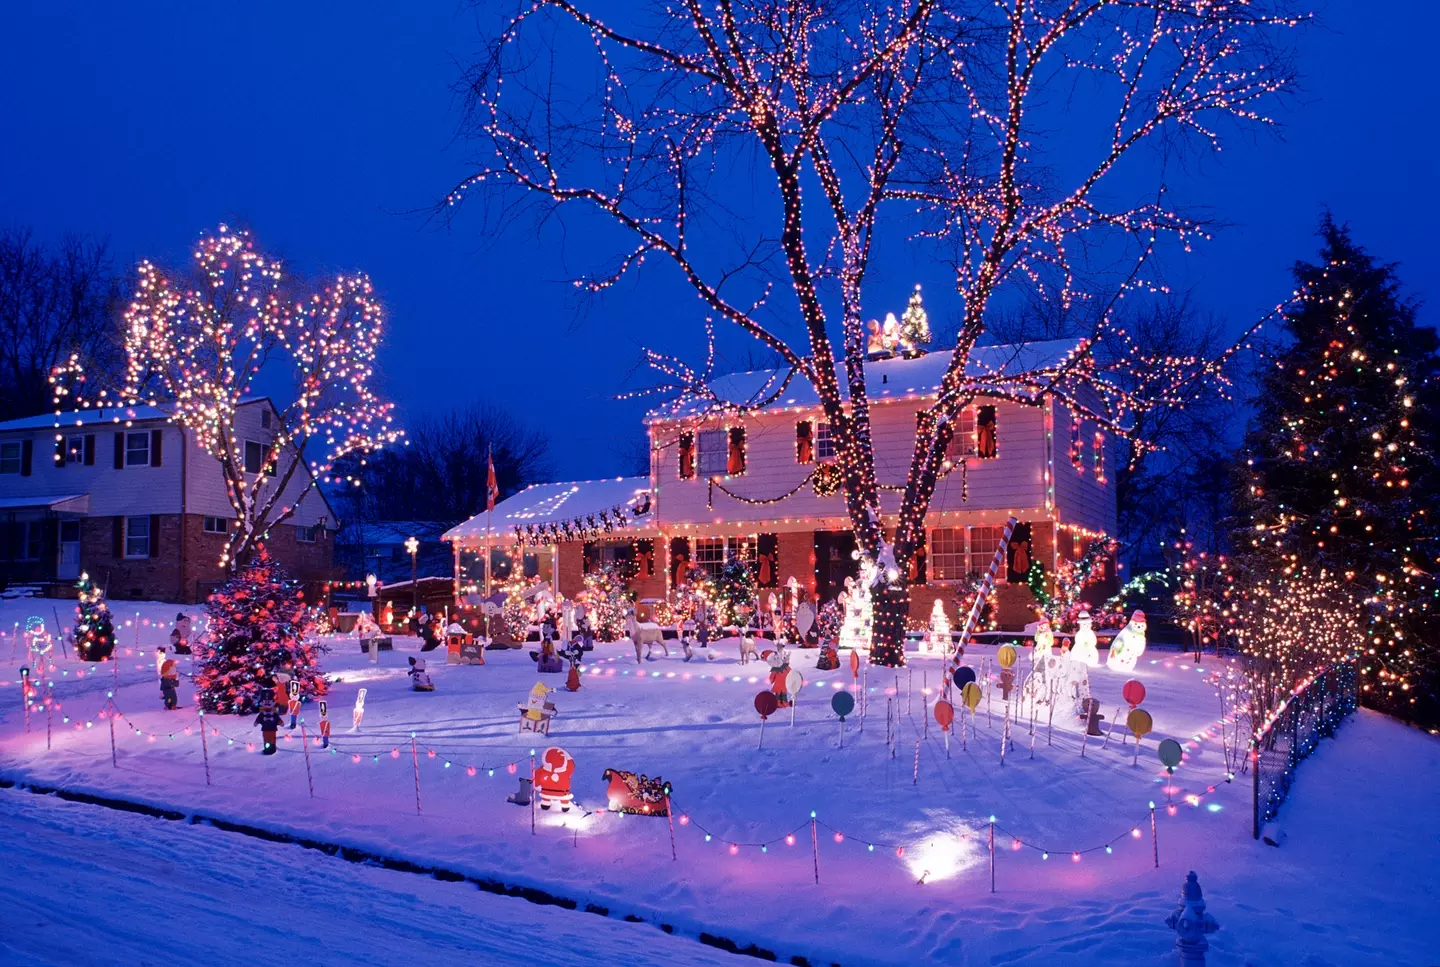 You may need to tone down the Christmas lights to save money.